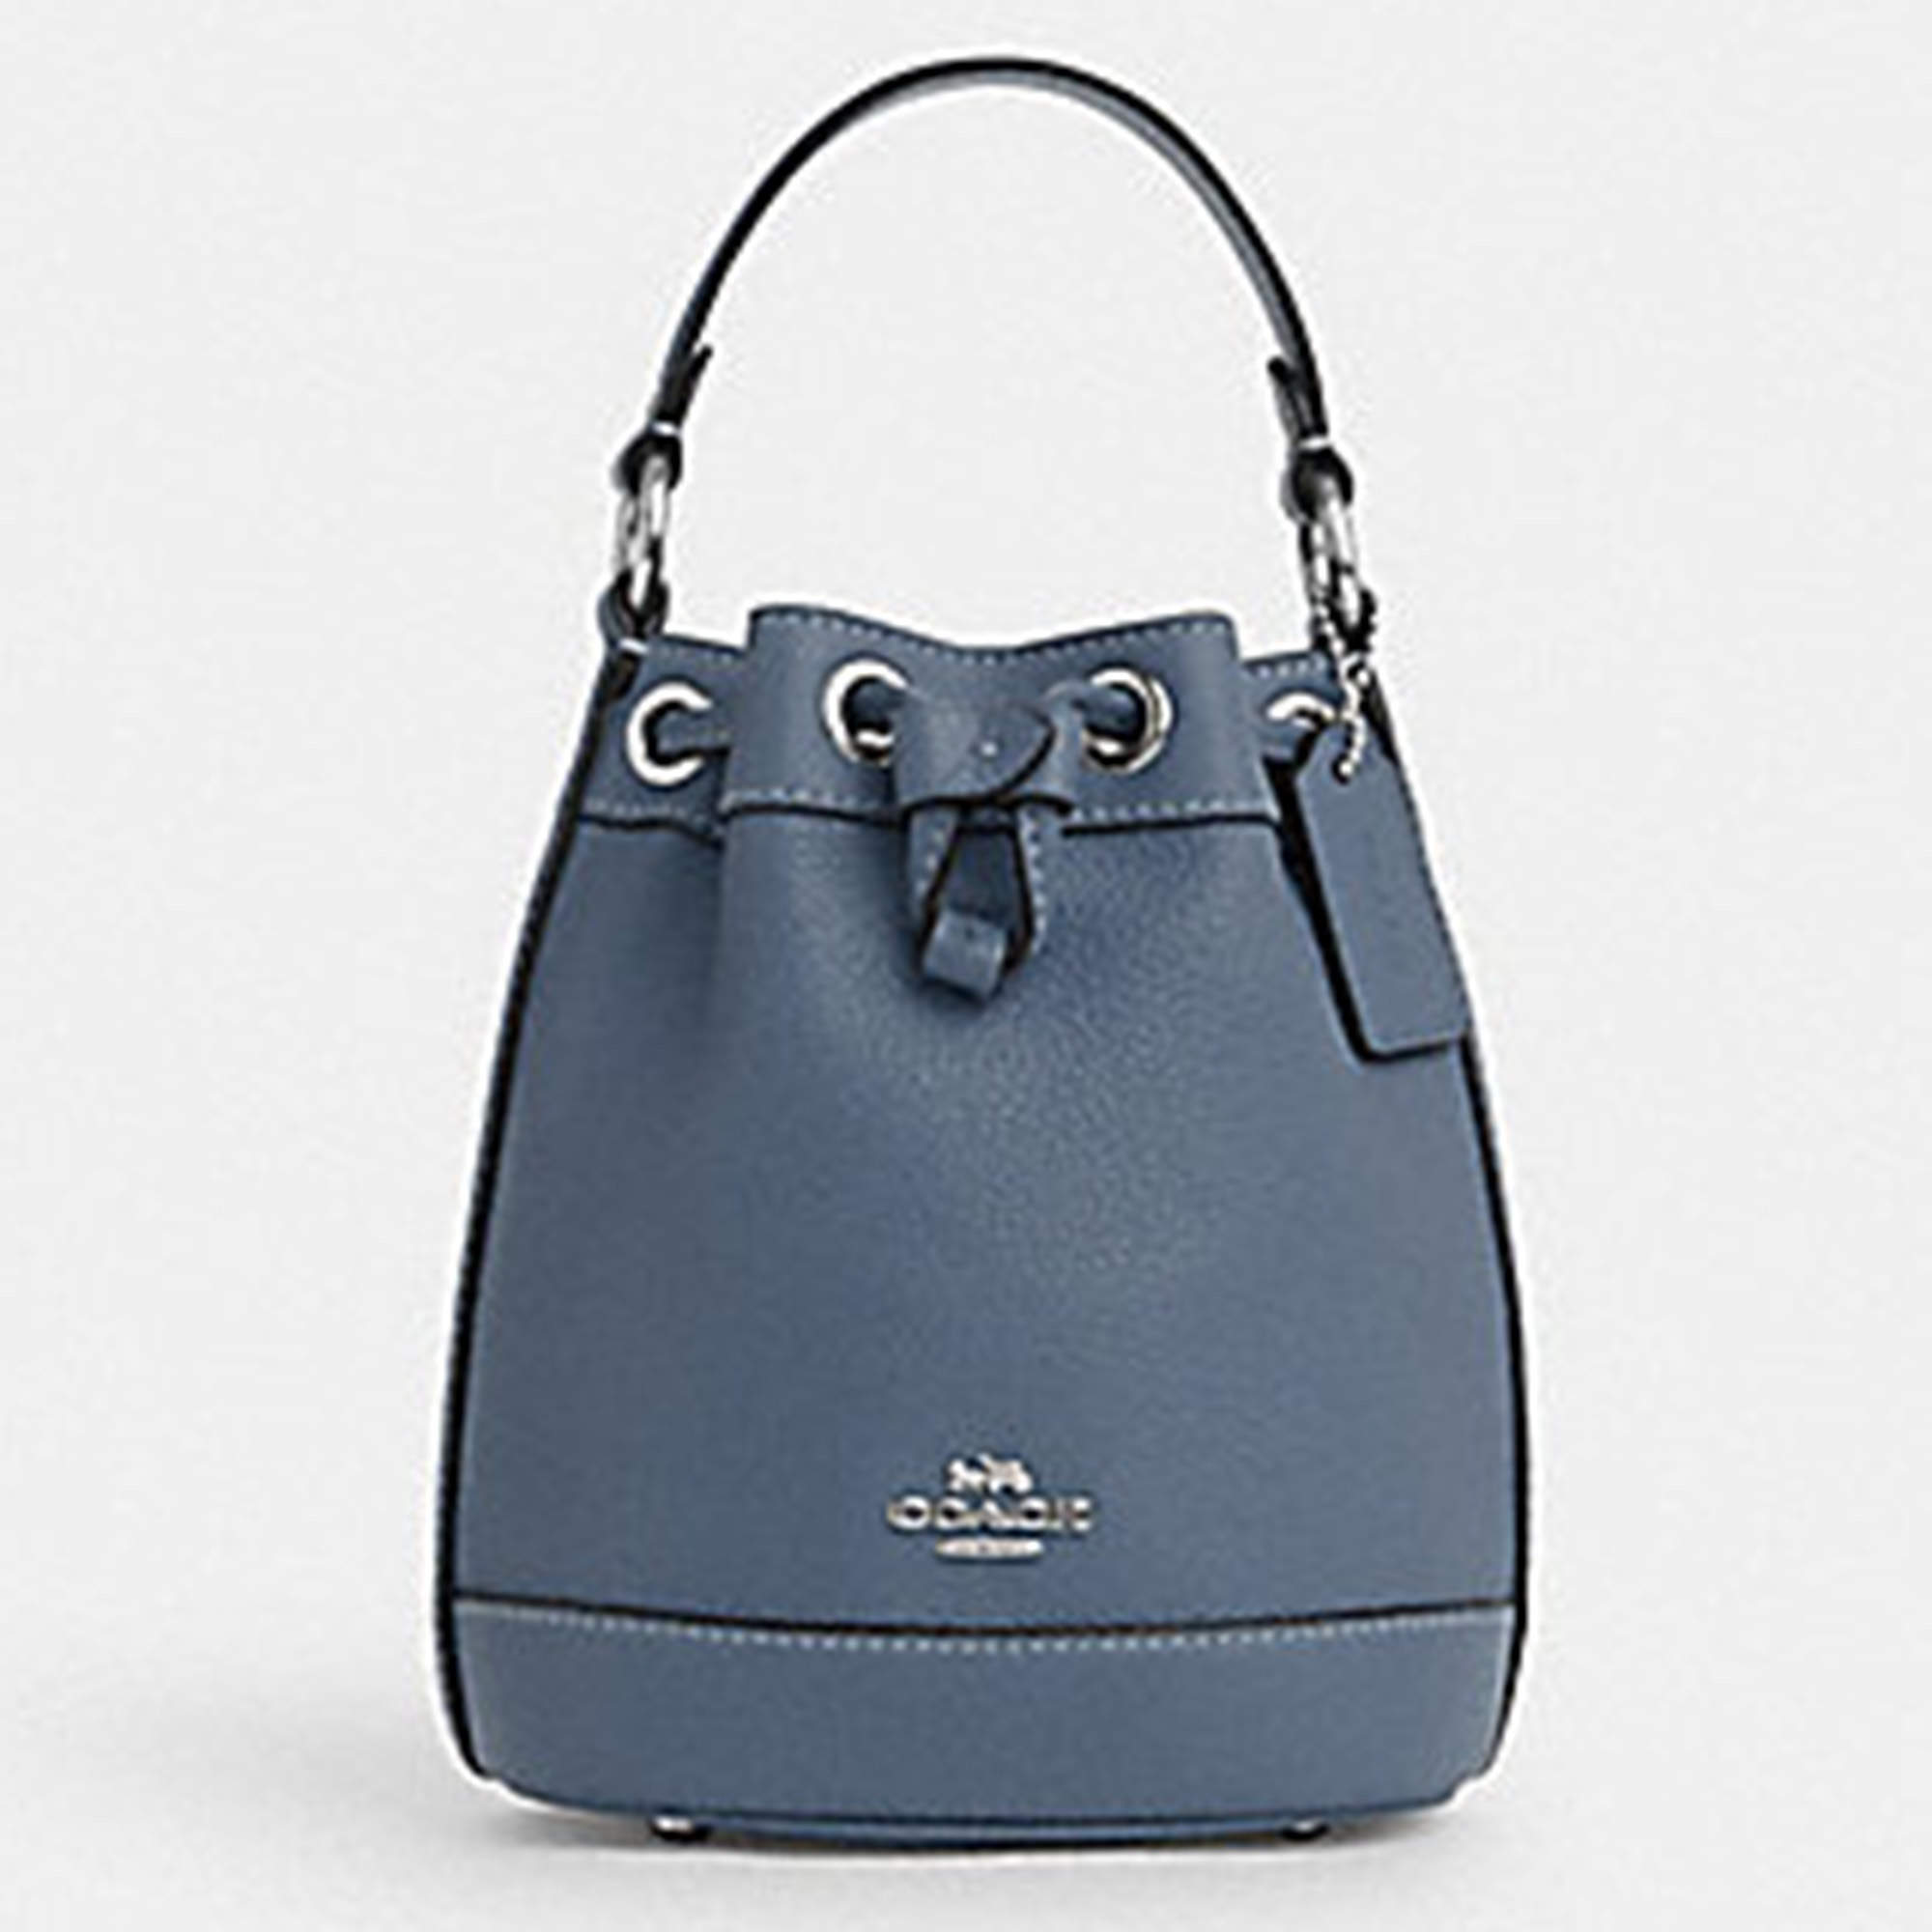 Willow Bucket Bag In Signature Canvas | COACH